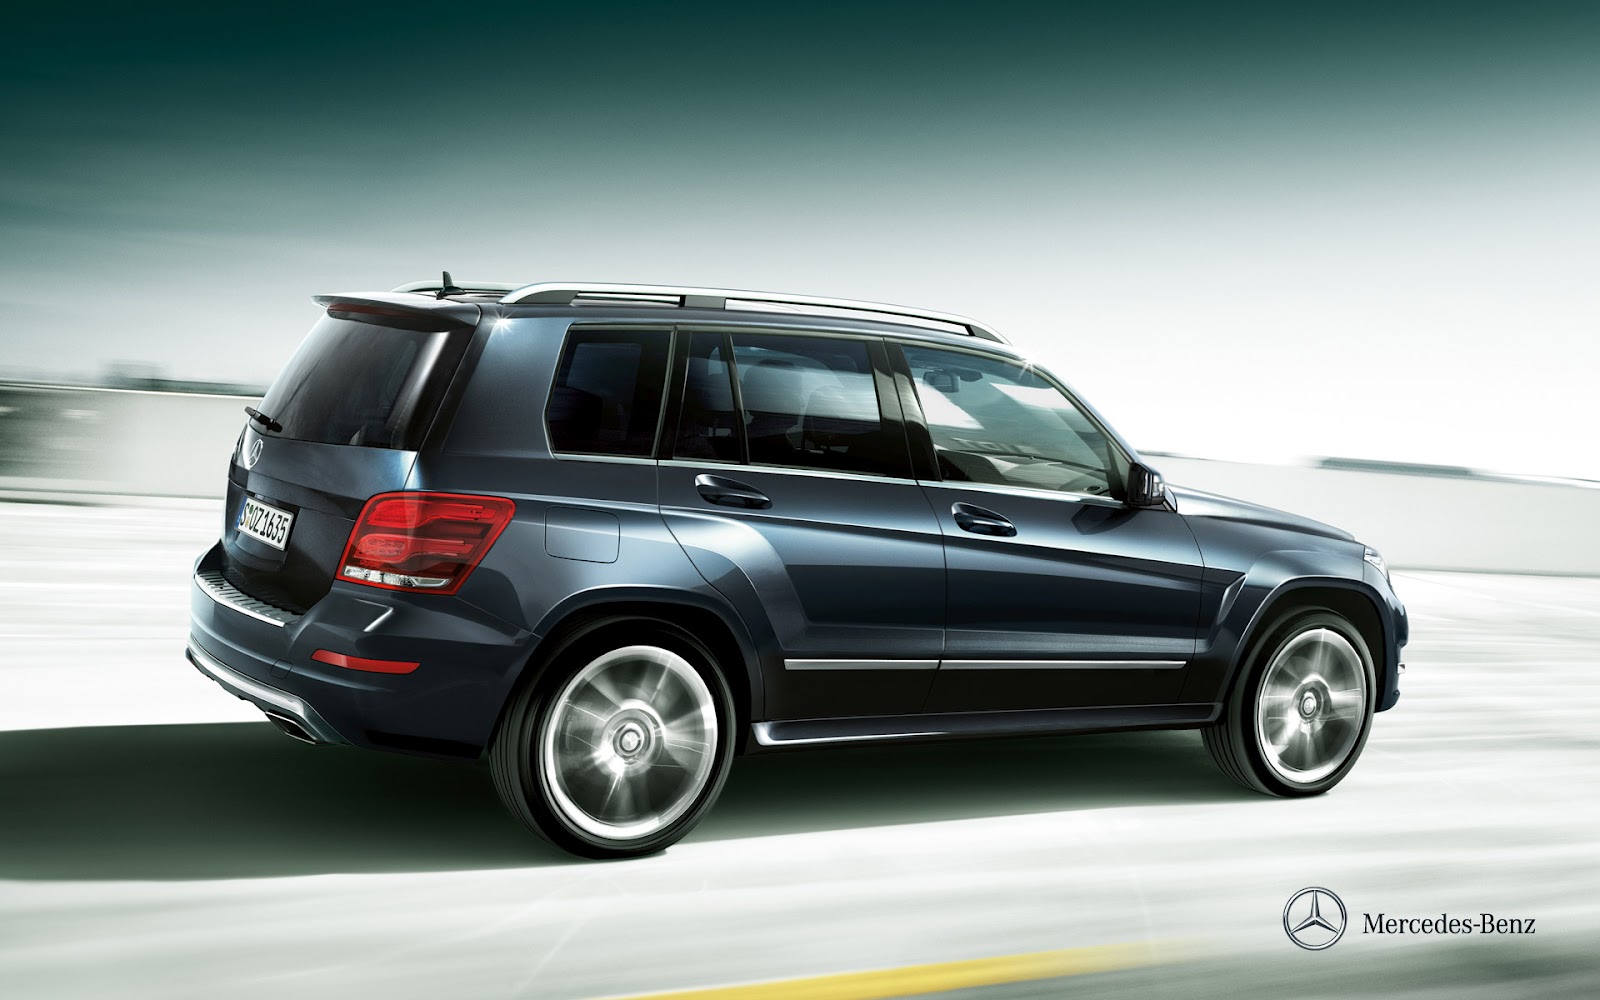 Mercedes-Benz GLK-Class Cars Pictures | Car Pictures | Cars Wallpaper